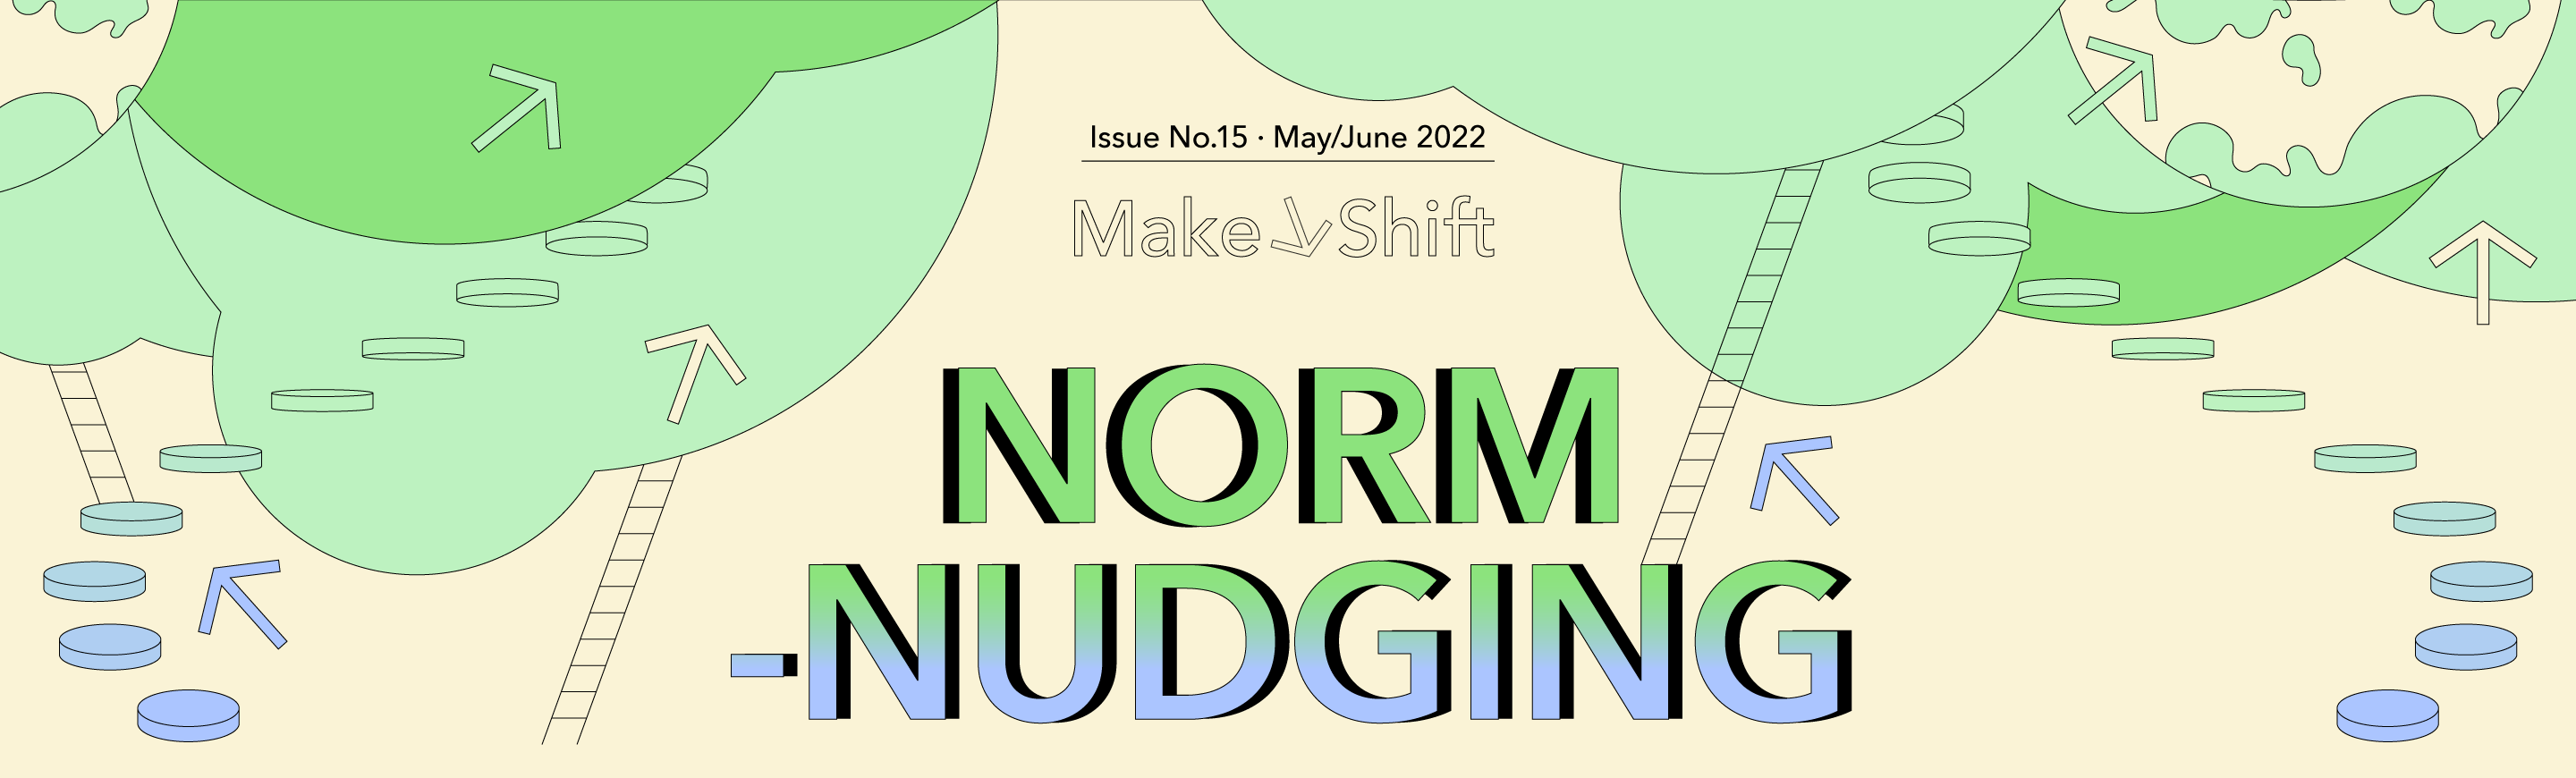 This is the May/June issue of MakeShift, called Norm-Nudging. The corresponding cartoon graphic depicts circular tile-like stairs and two ladders leading into a set of clouds, which allude to the trend's central theme of taking small steps towards a more purposed lifestyle.